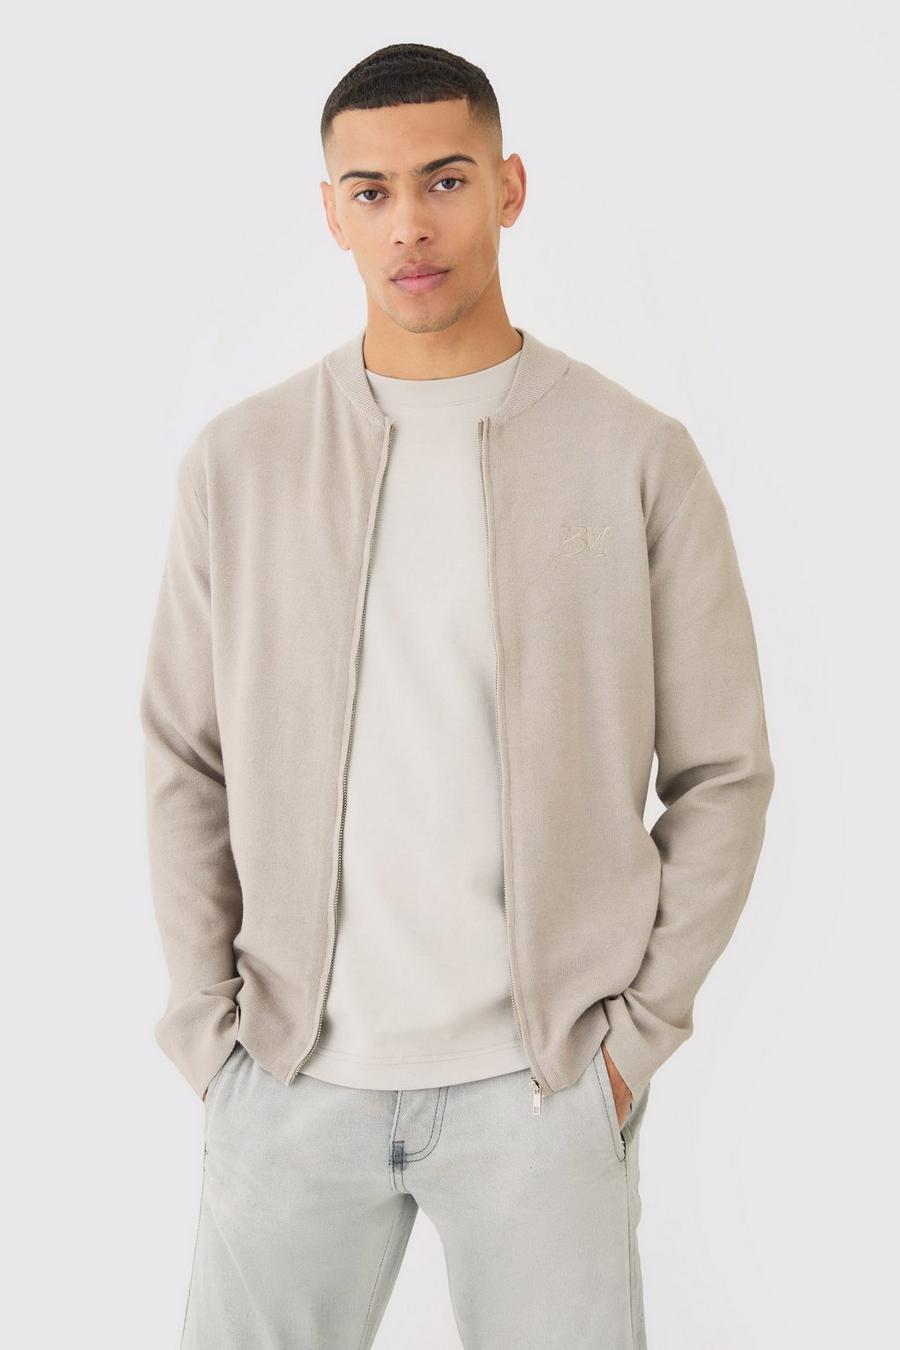 Giacca Bomber Regular Fit in maglia con logo Man, Light grey